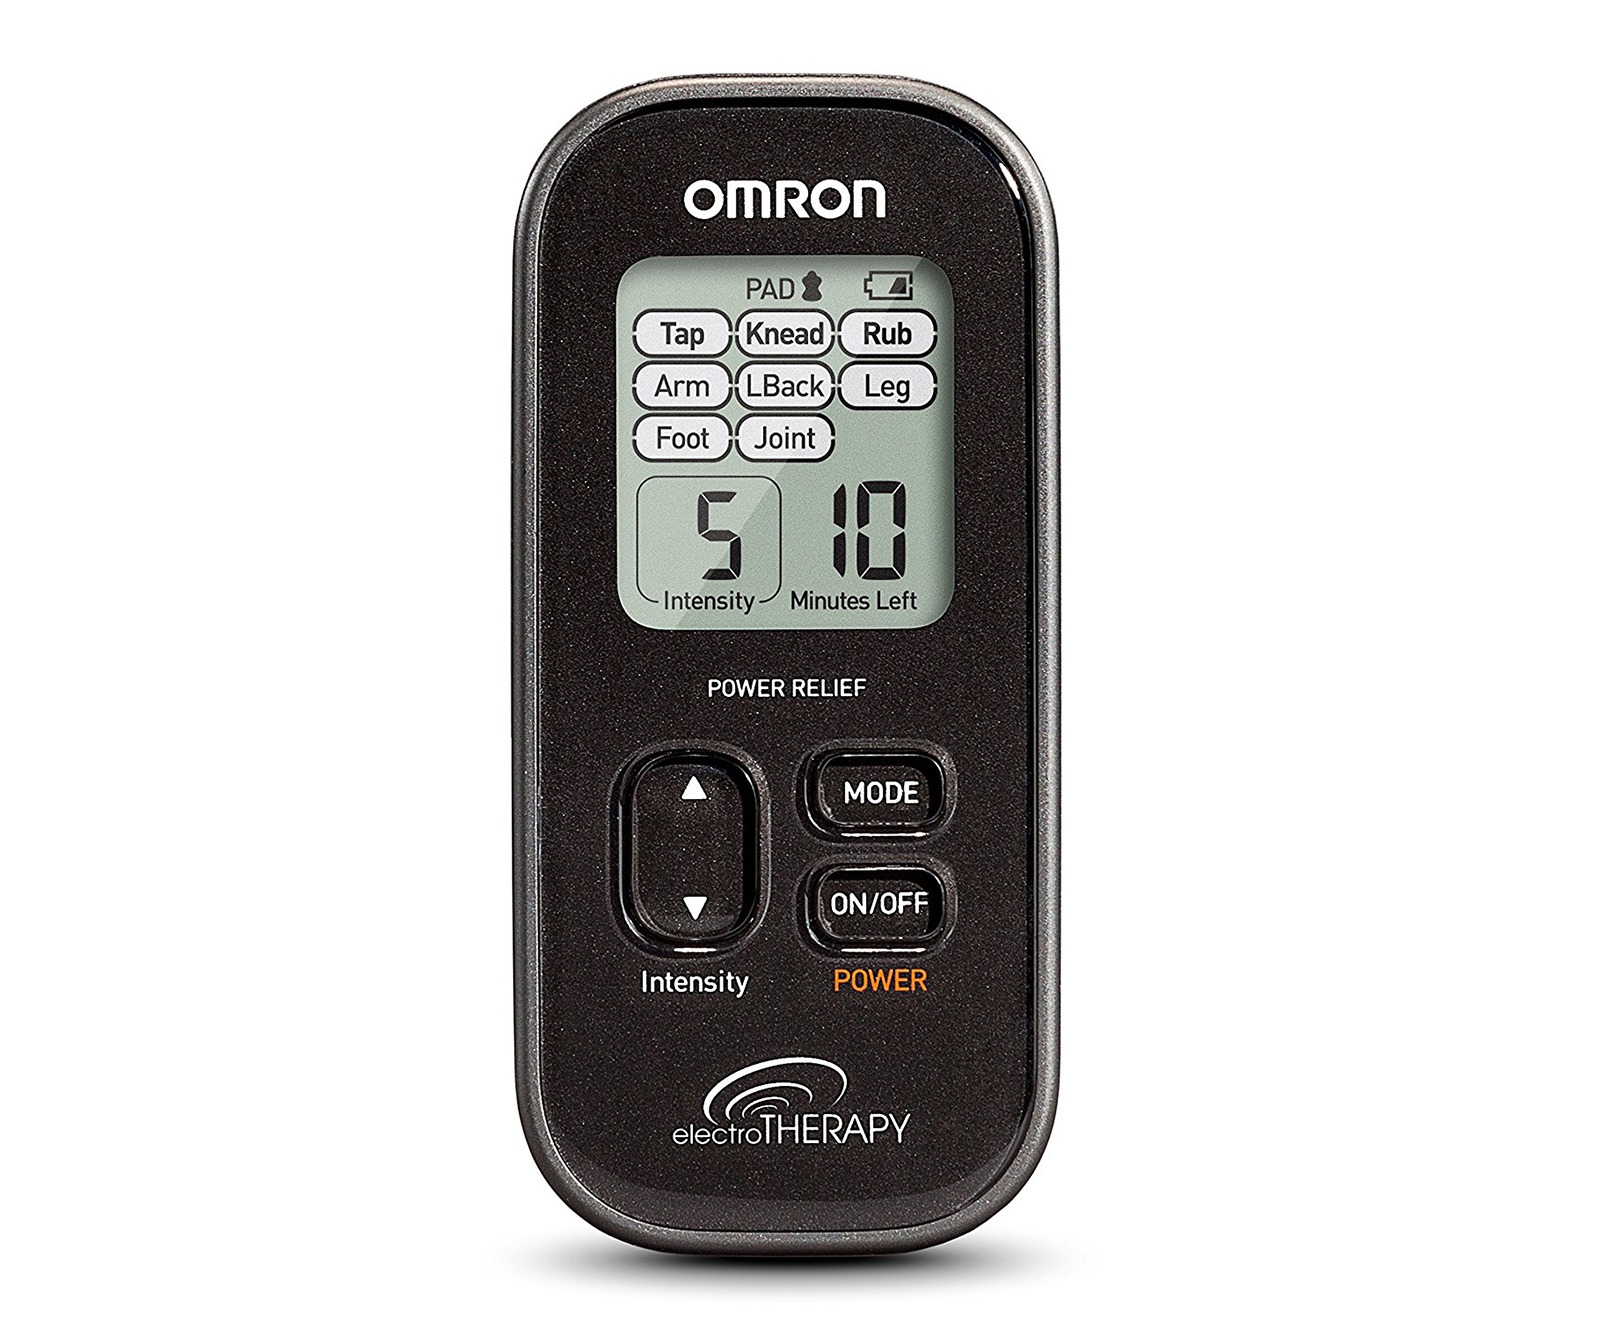 A Quick Overview of the OMRON Max Power Relief TENS Unit 